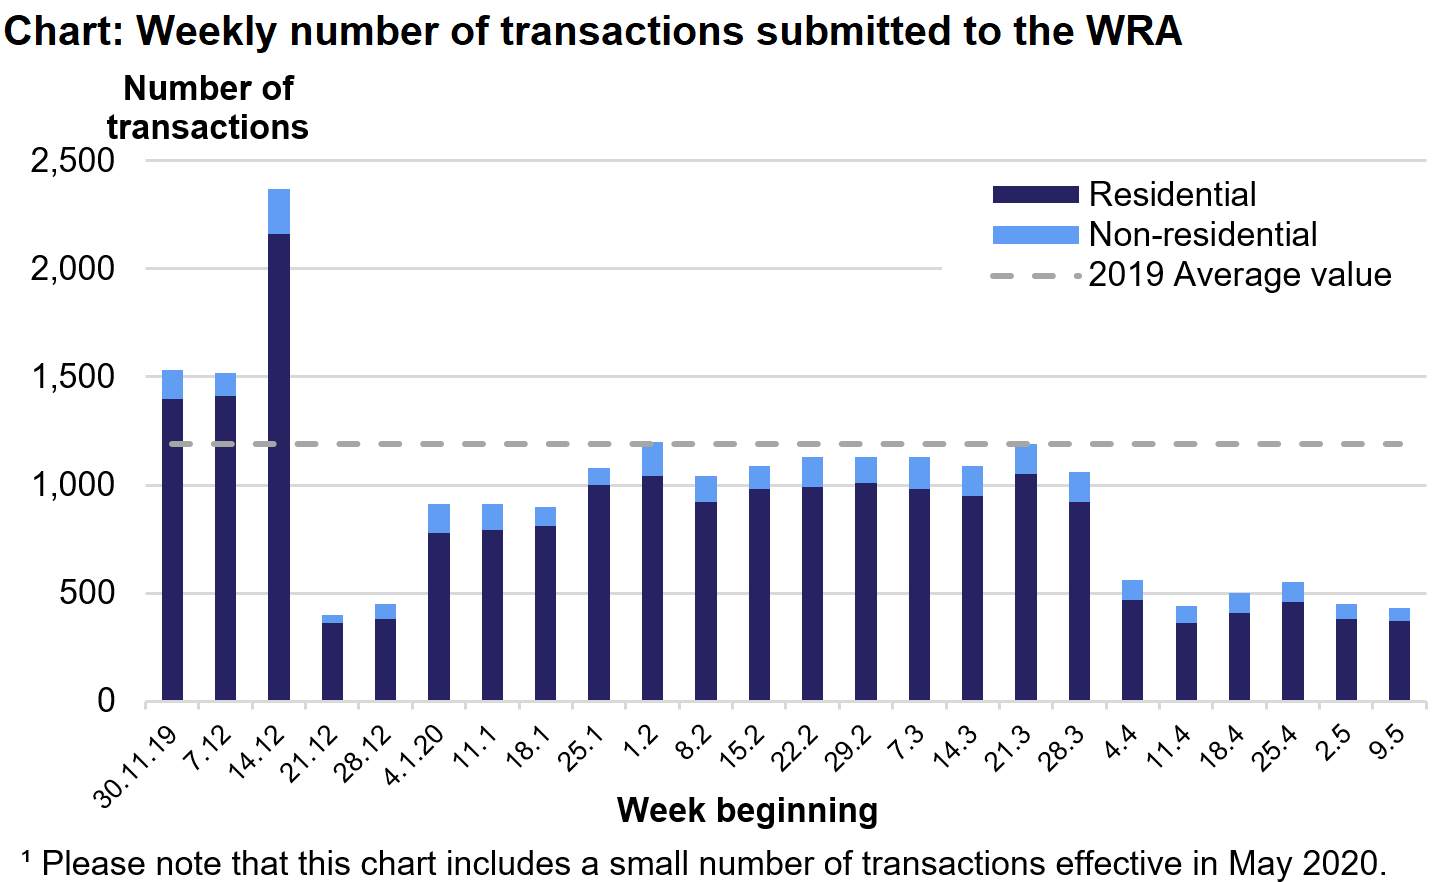 The chart shows the number of residential and non-residential transactions submitted to the WRA each week from December 2019 to May 2020. Please note that this chart includes a small number of transactions effective in May 2020.